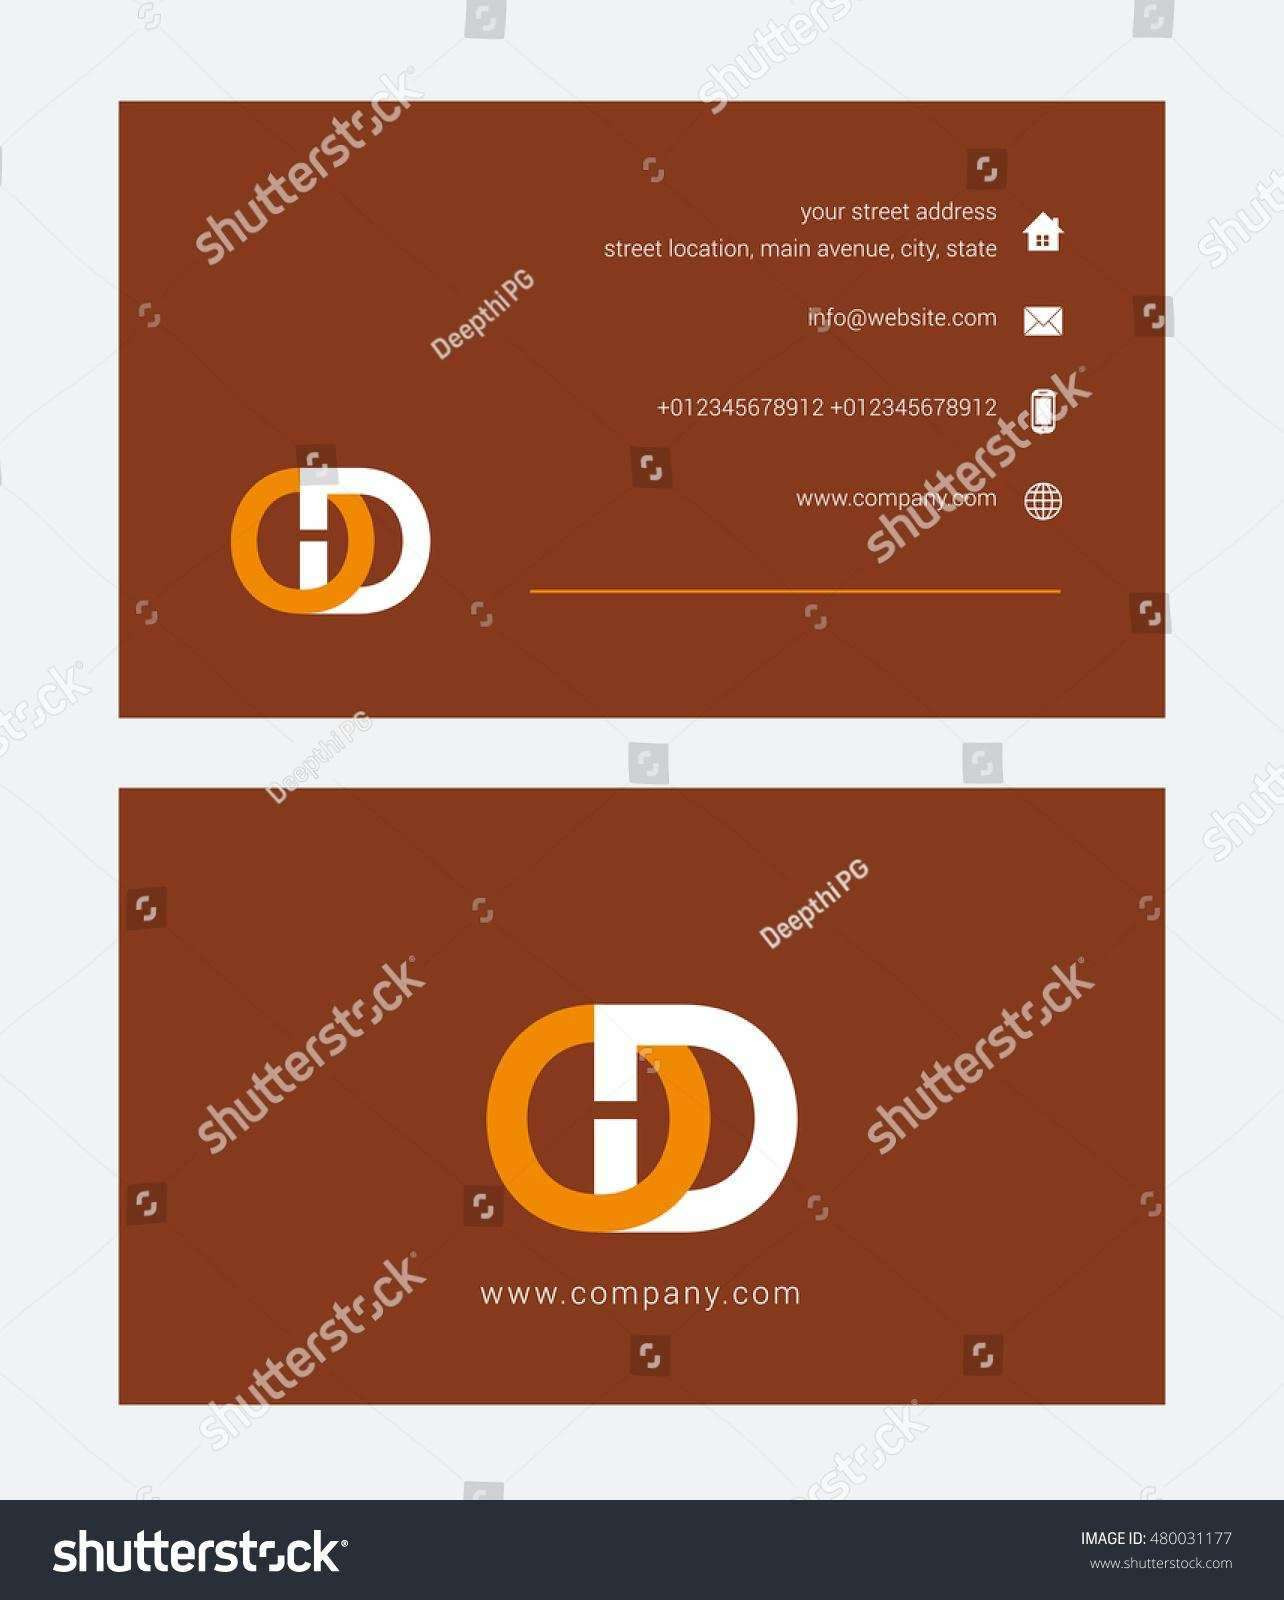 Business Card Powerpoint Templates Free Caquetapositivo Of Web Design Business Cards Templates